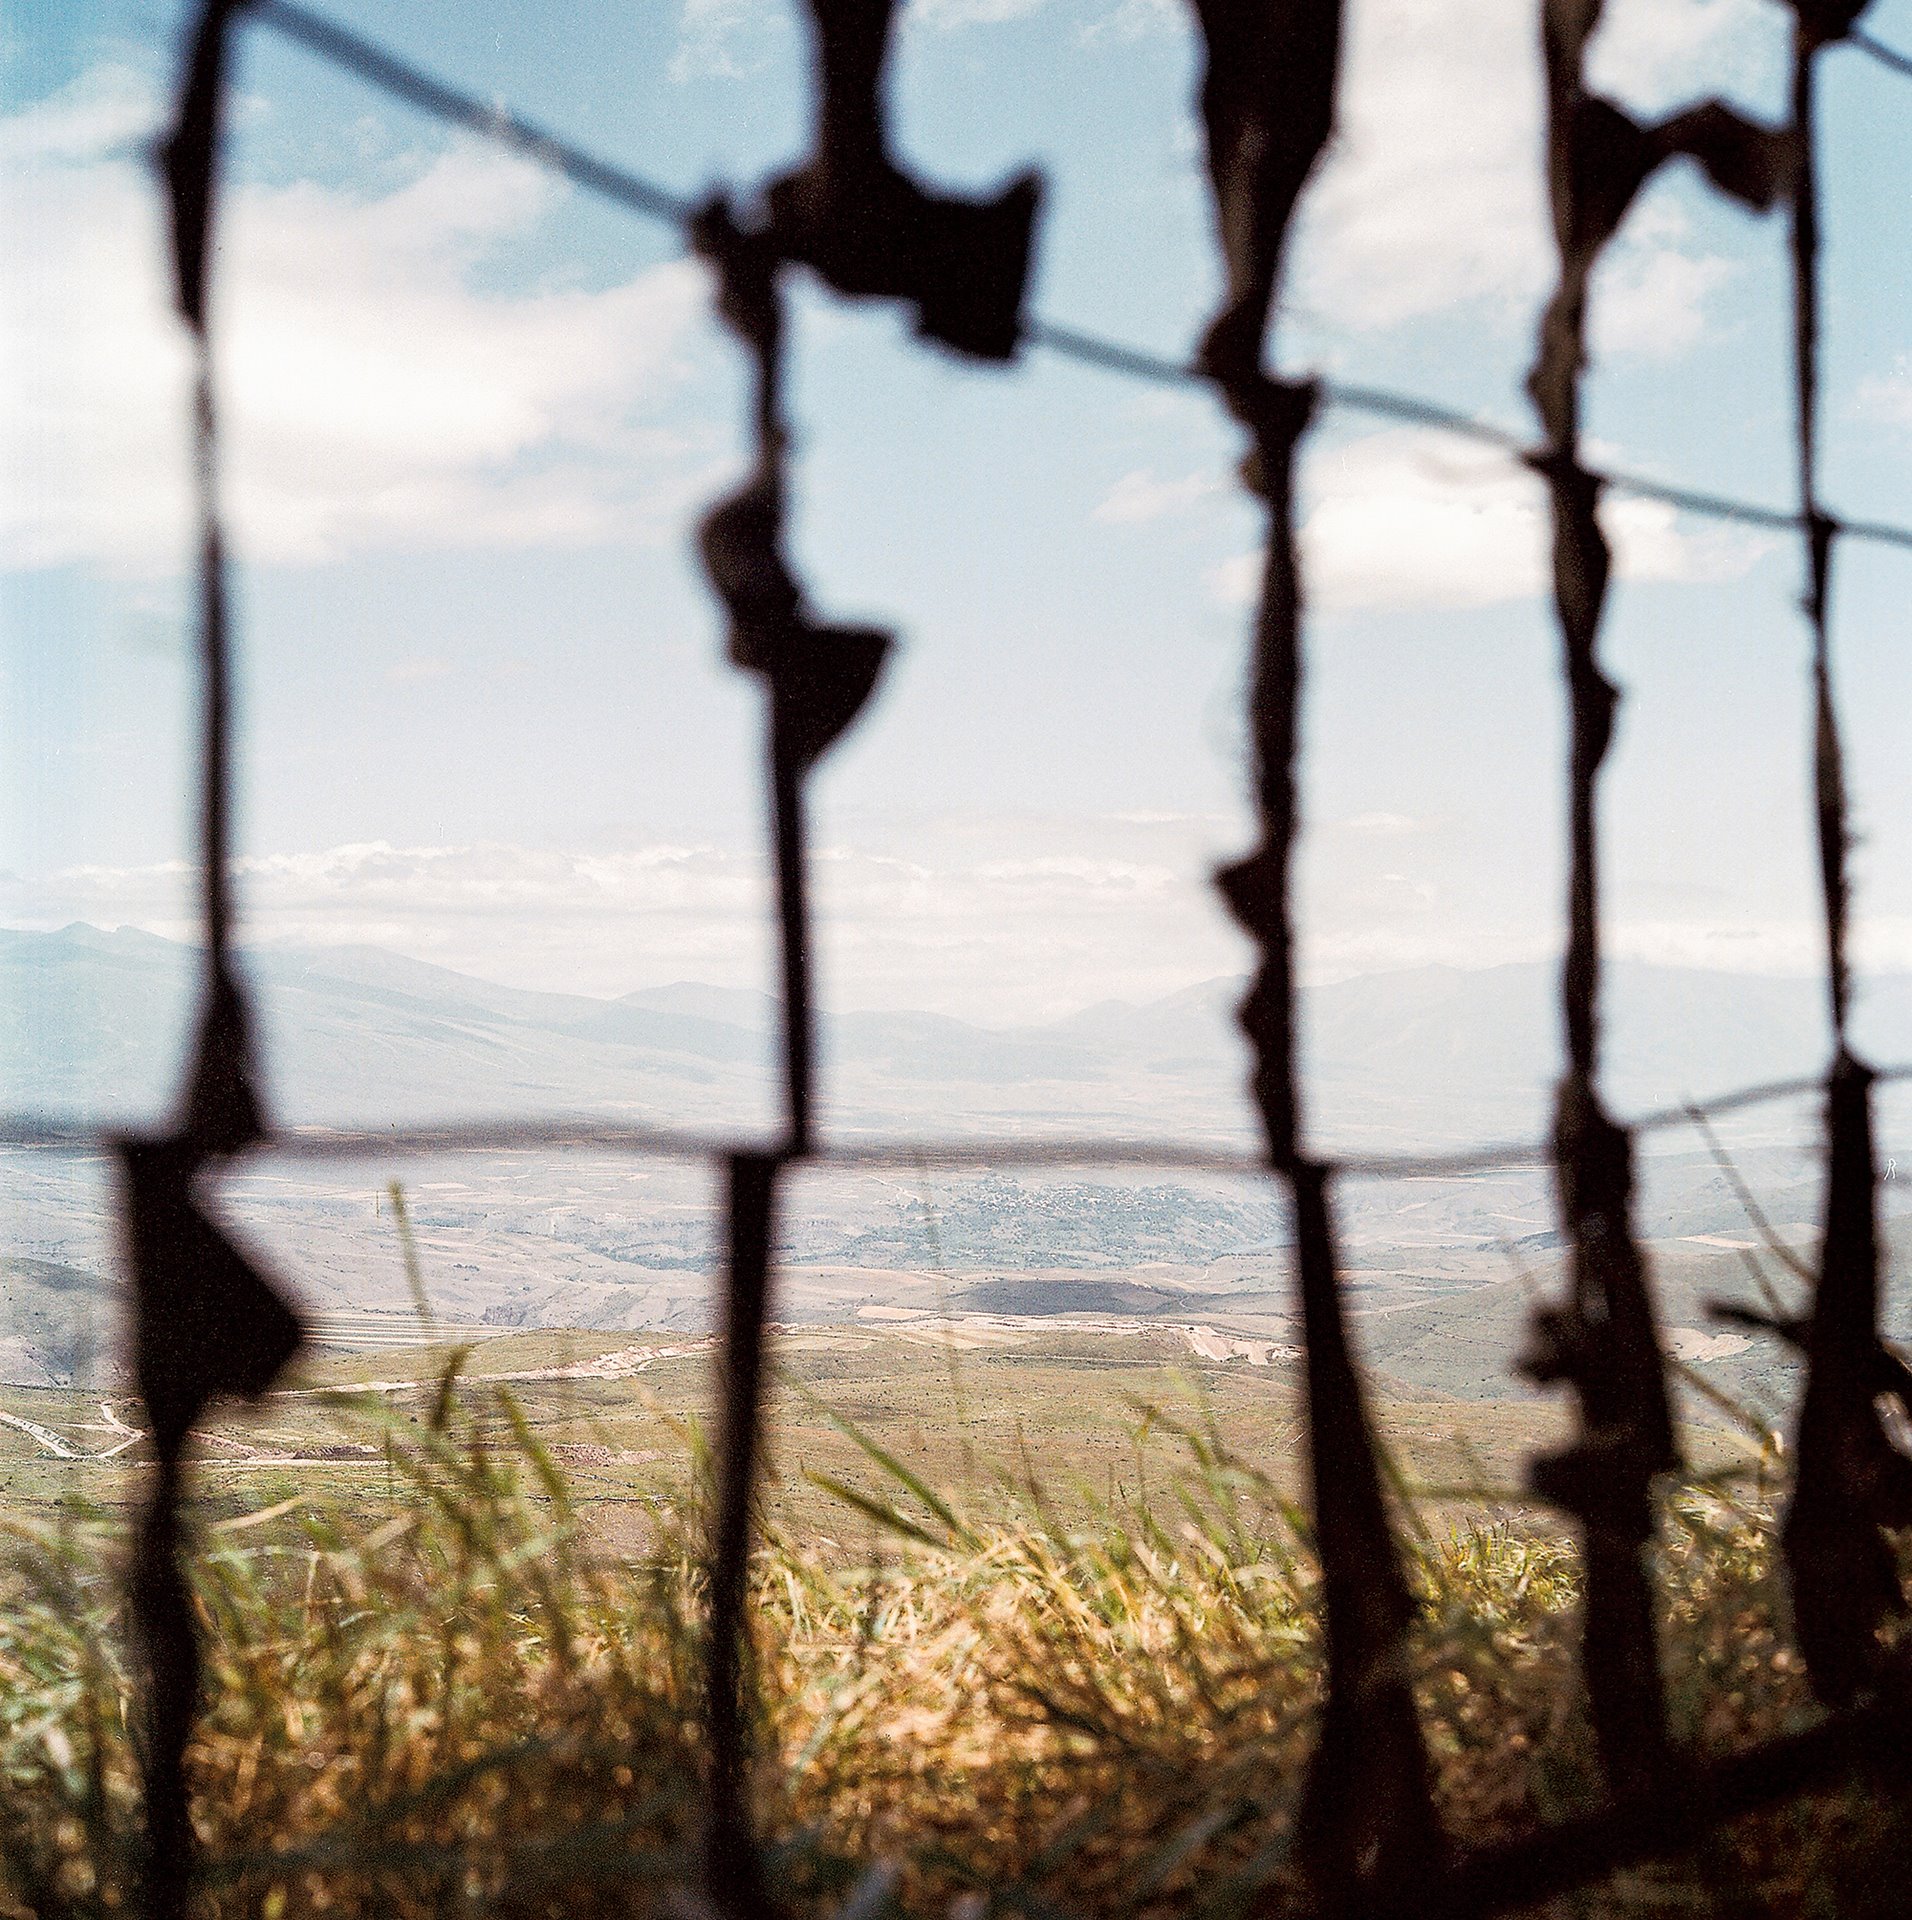 A view from between sniper positions overlooking a land littered with mines at the militarized border of Armenia and Azerbaijan, Nakhchivan, Azerbaijan. The Satyrus effendi butterfly, named after Rustam Effendi, the photographer&rsquo;s father, flies across this border, traversing the Zangezur mountain ridge.